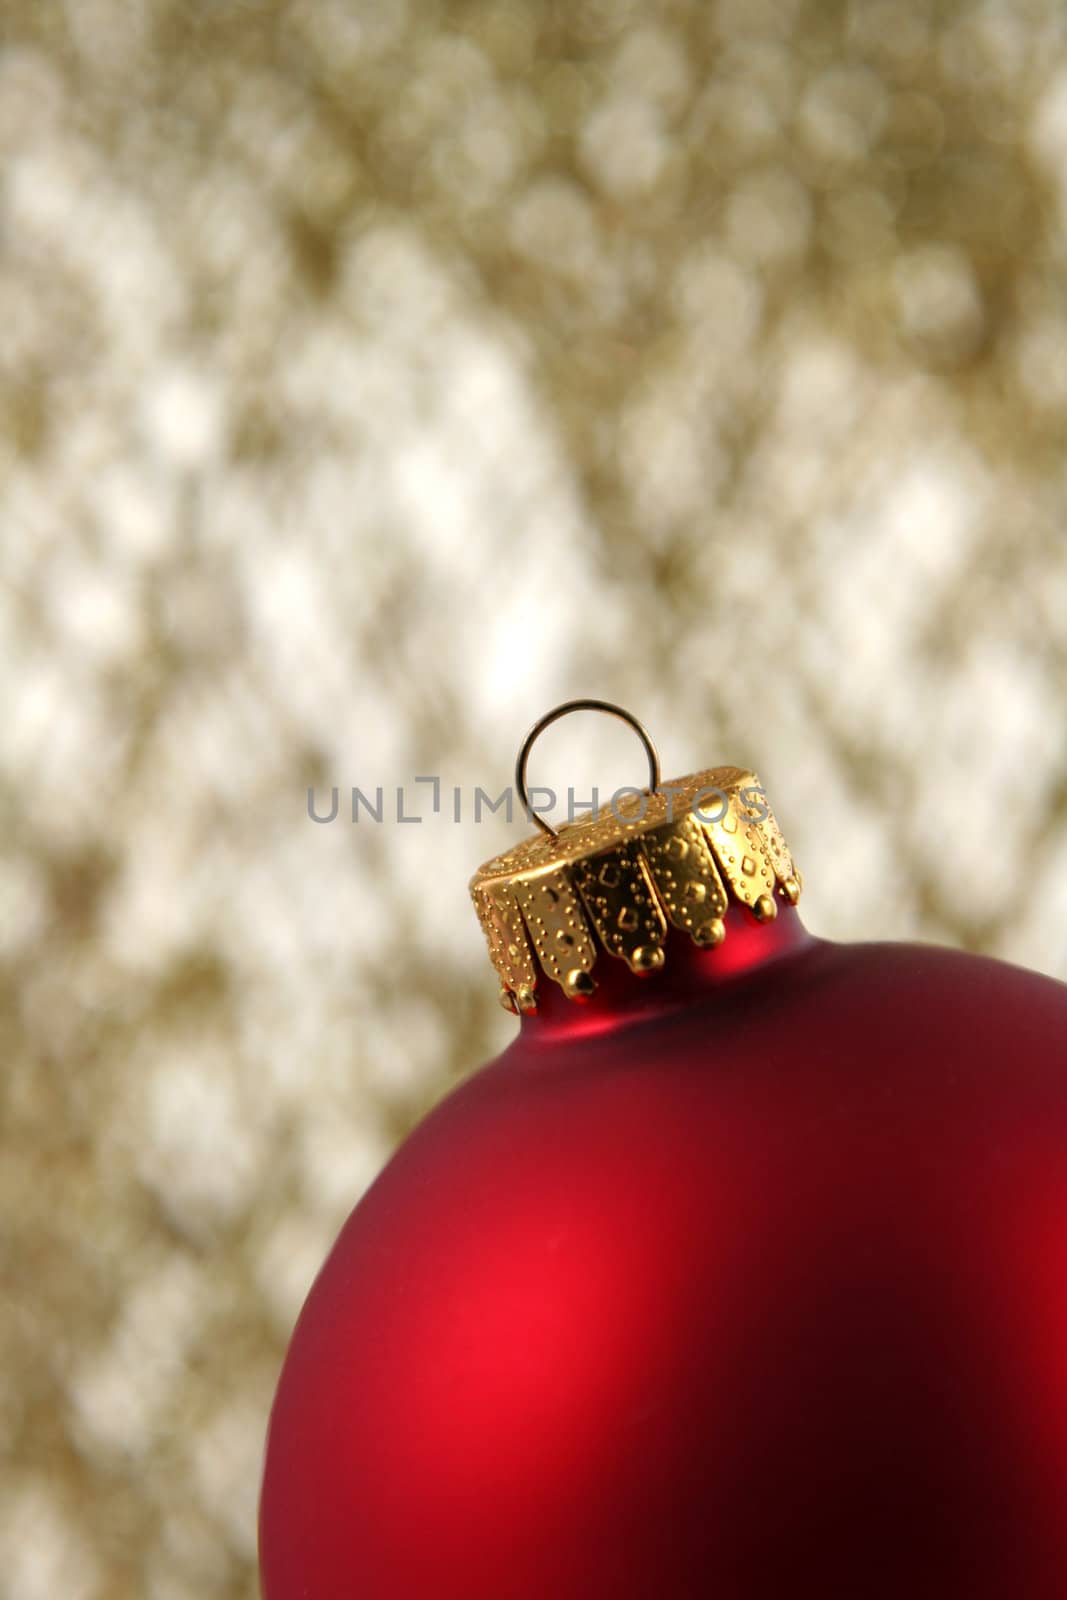 A red Christmas bauble backed by gold glittery strings.
